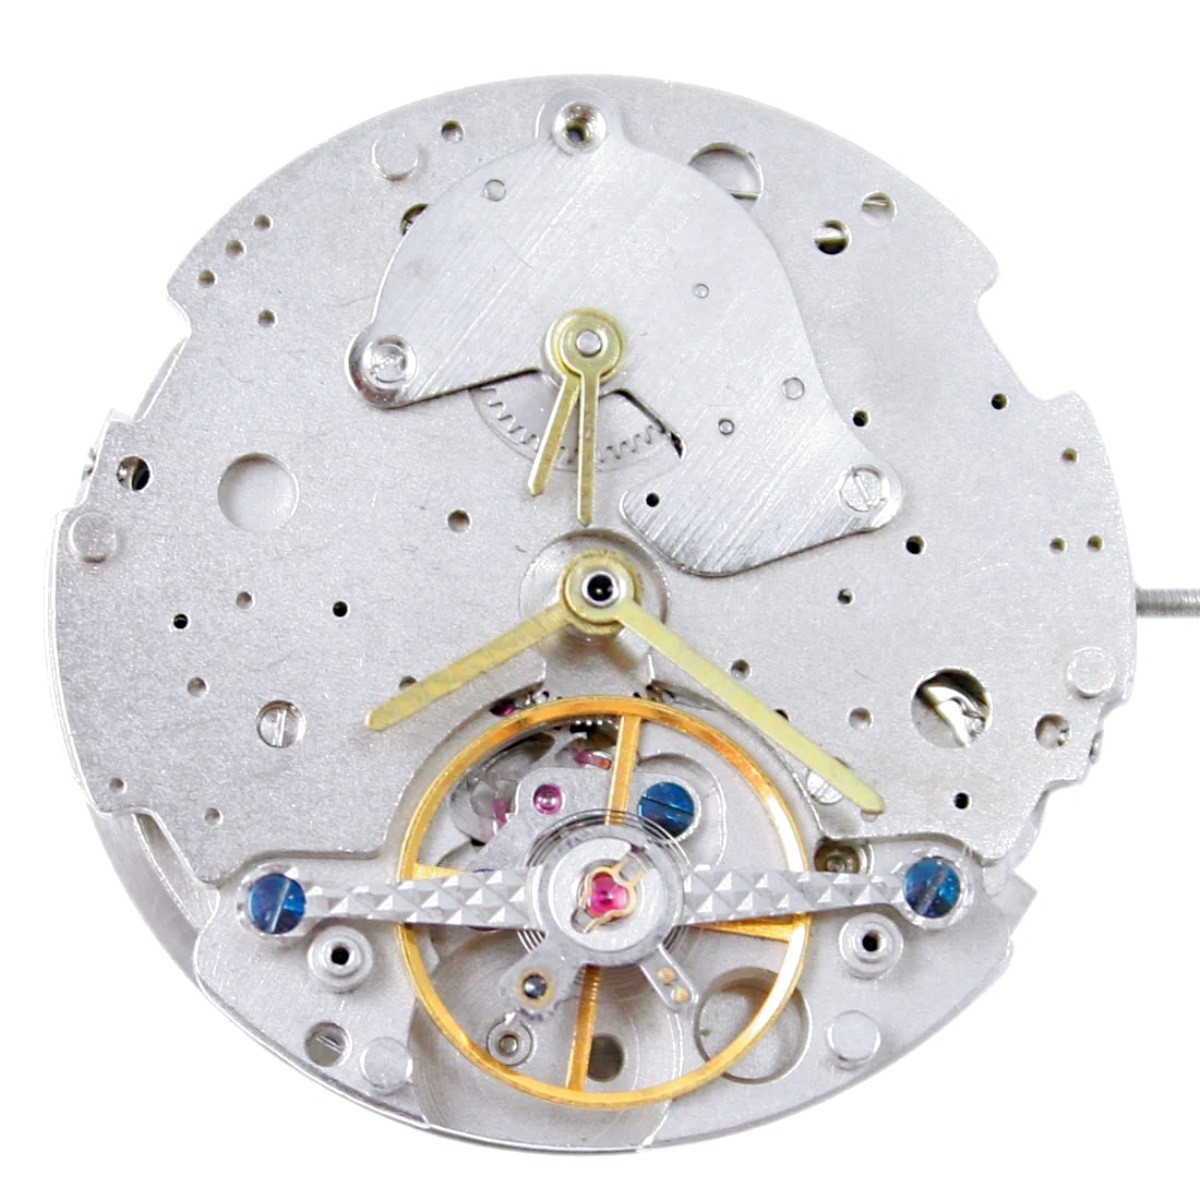 Automatic watch movement R30 dual time incl. watch hands - Order chinese  watch movements online